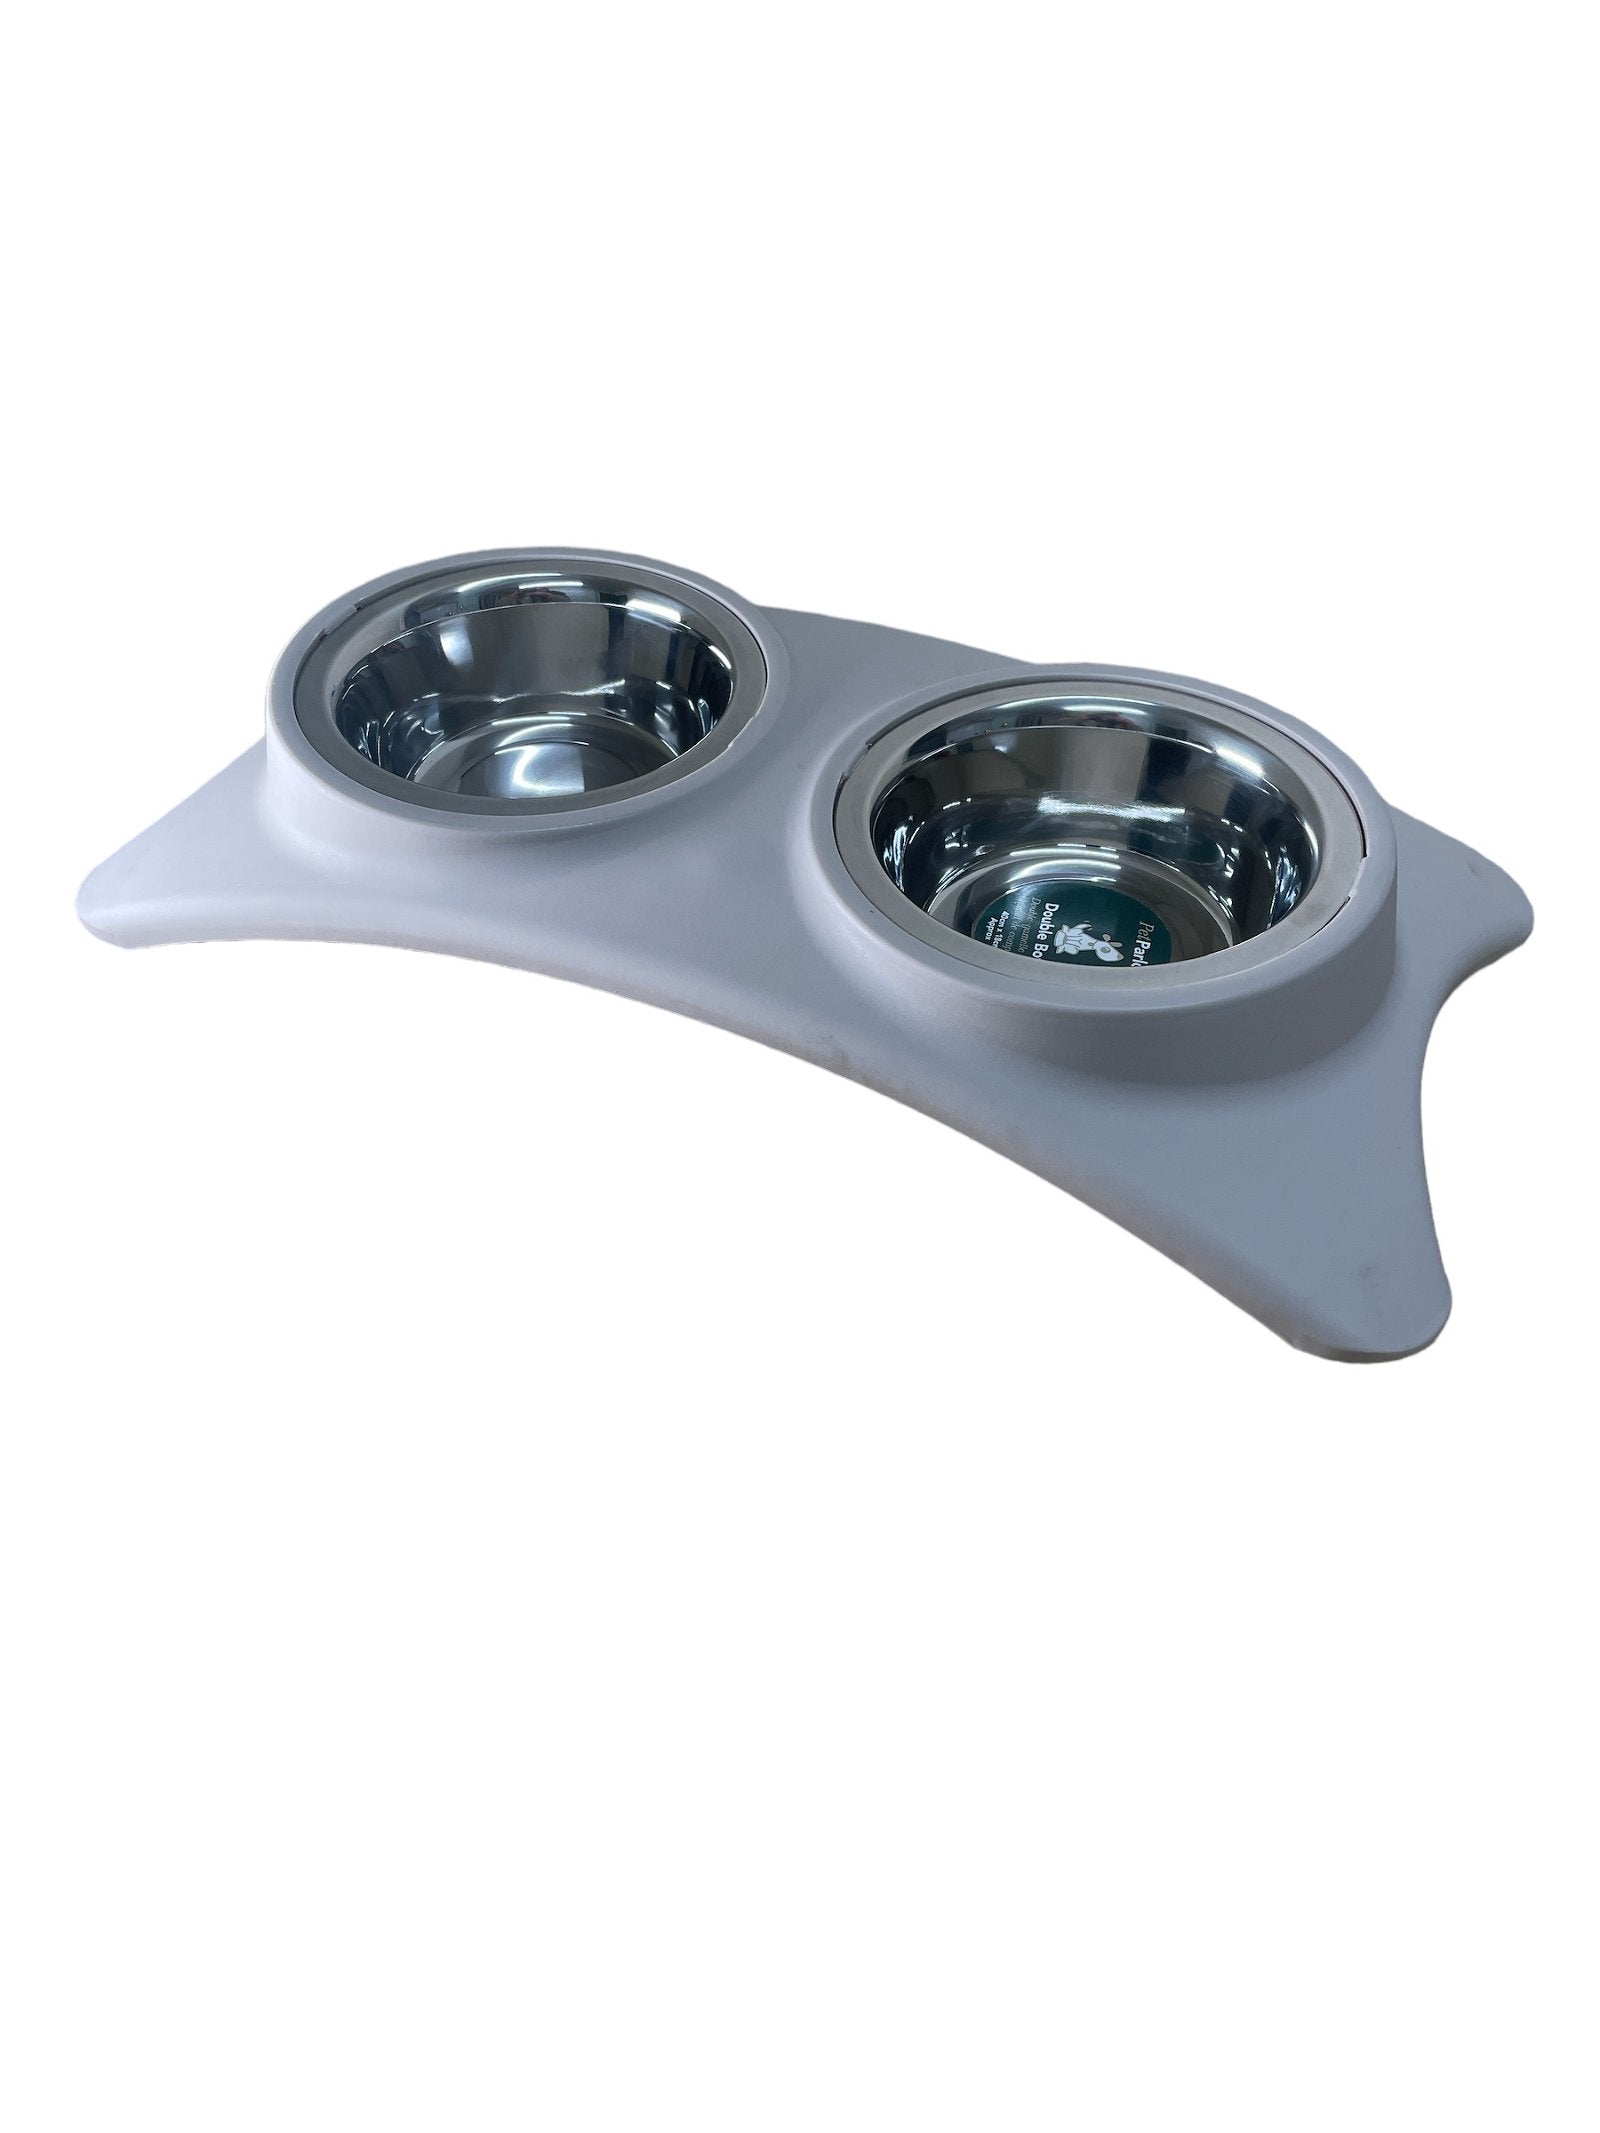 View Double Pet Bowls For Dog Cat information